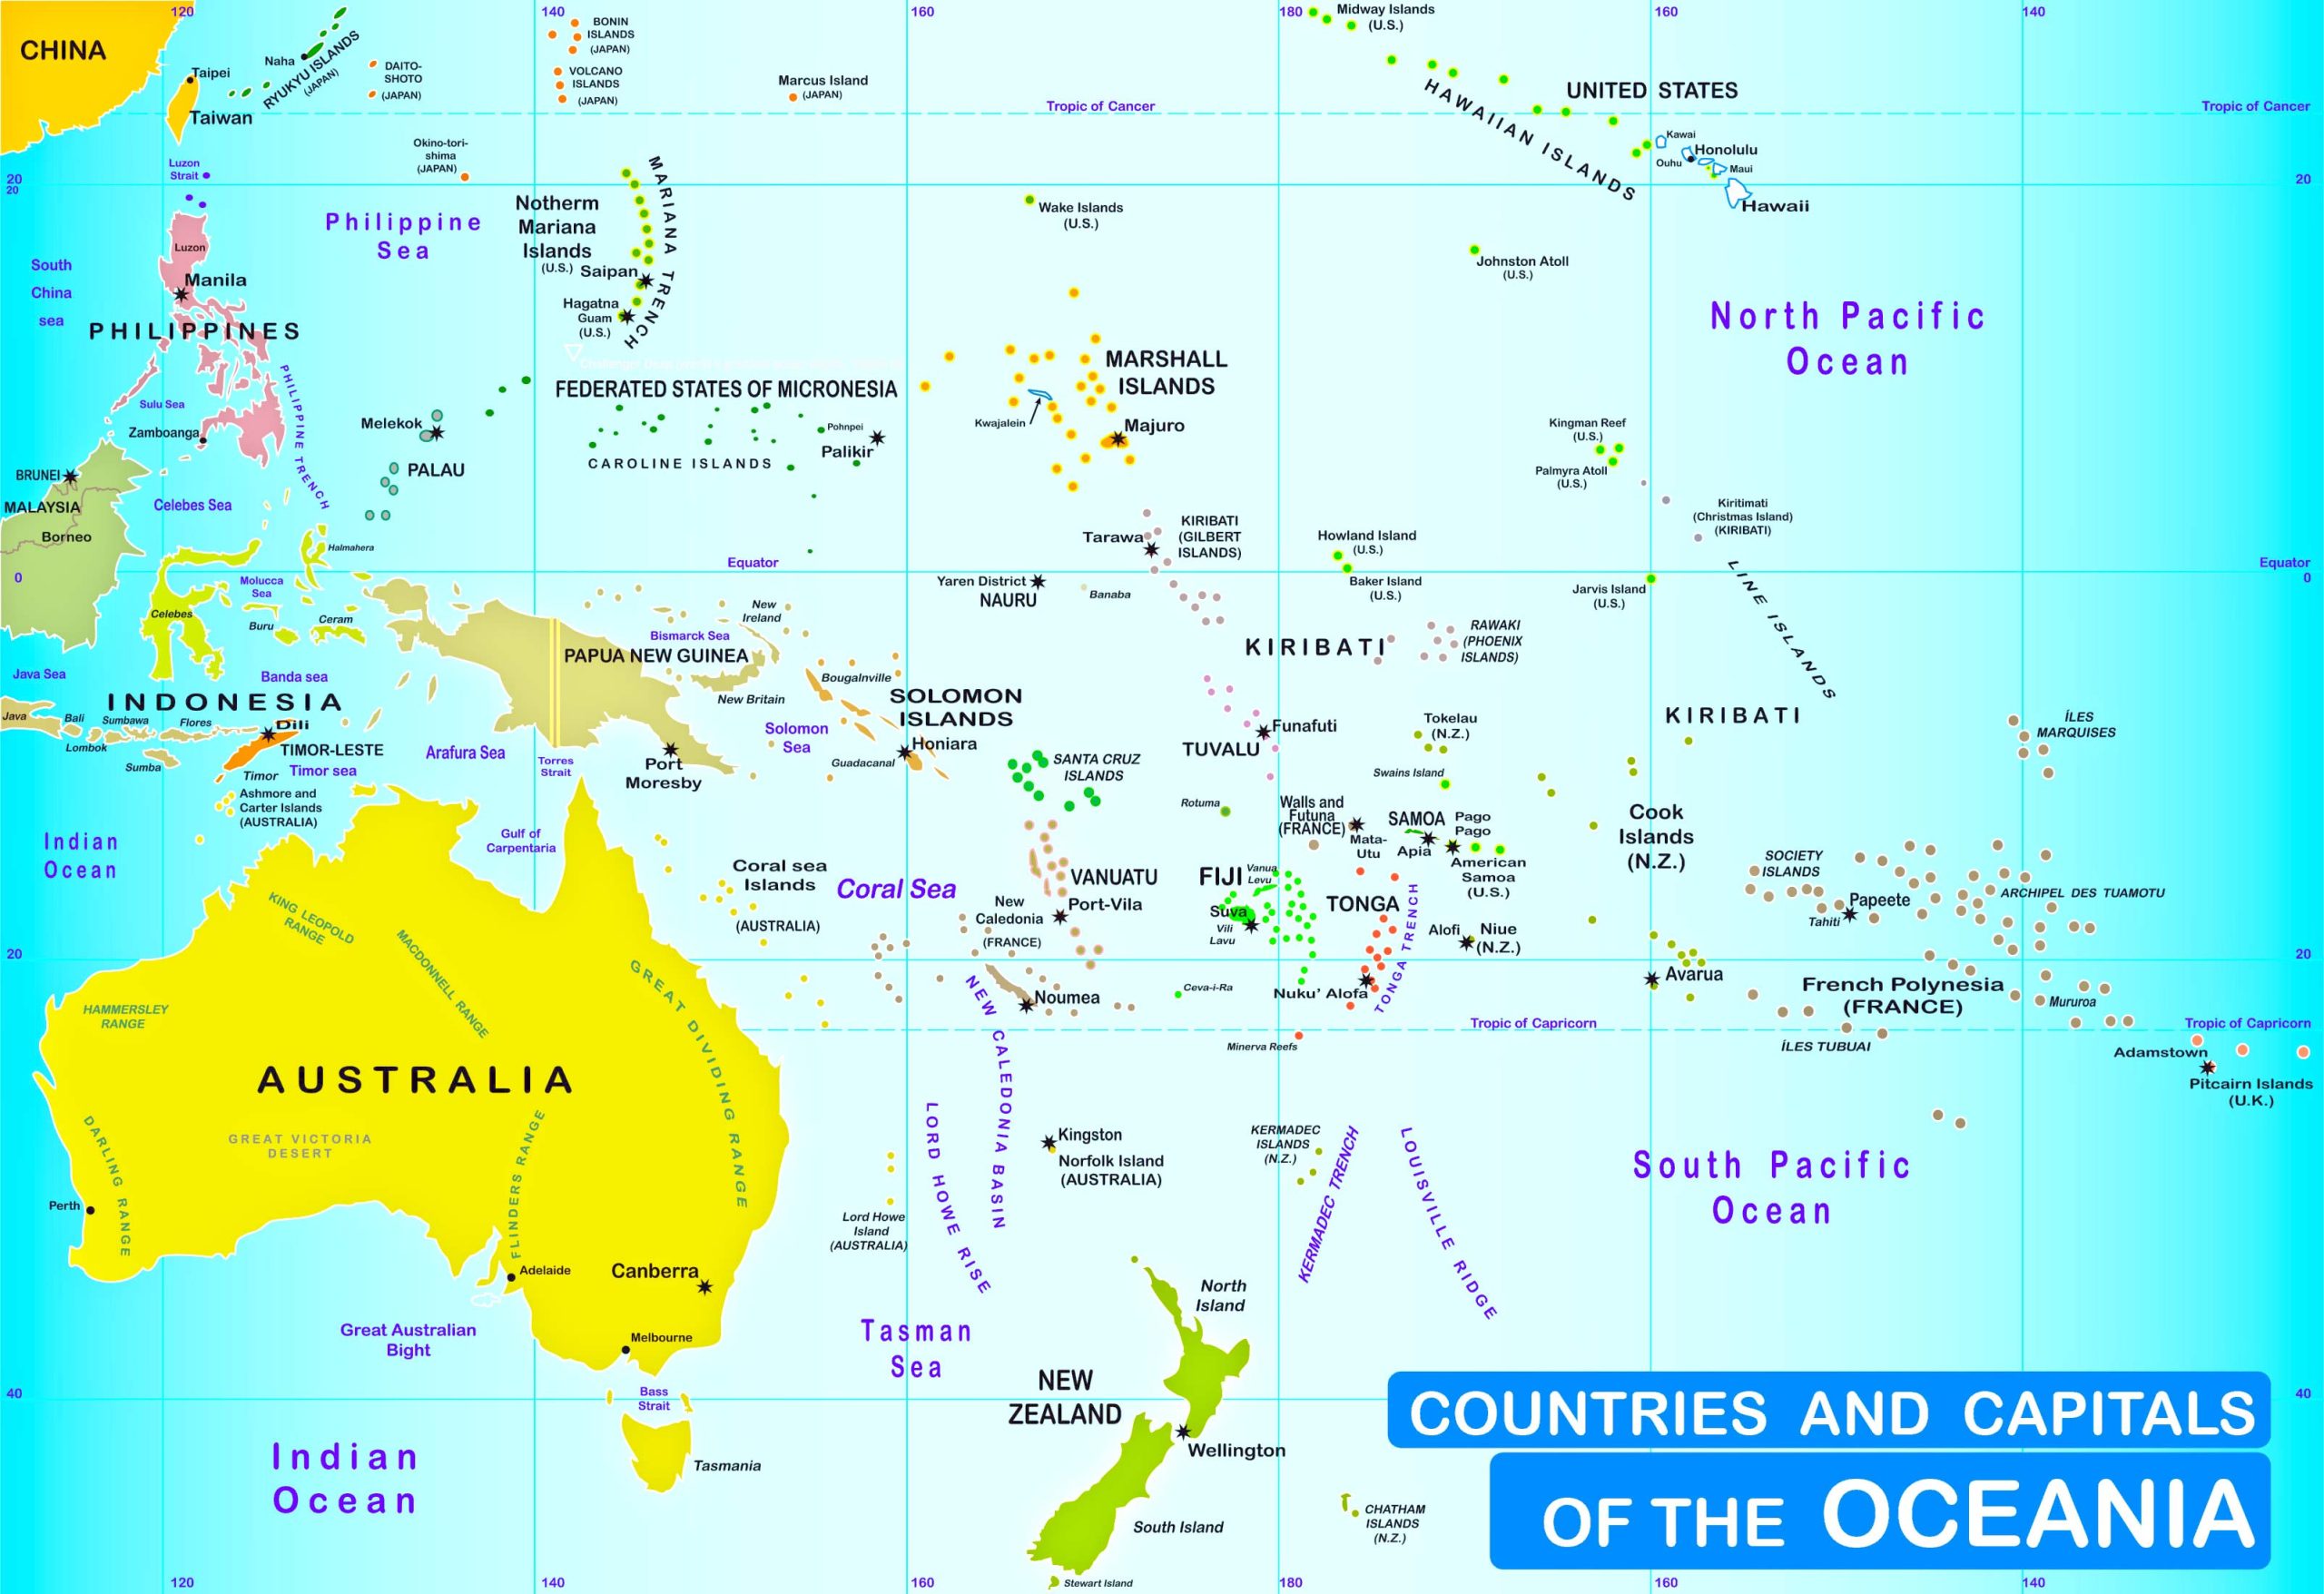 Countries and Capitals of the Oceania